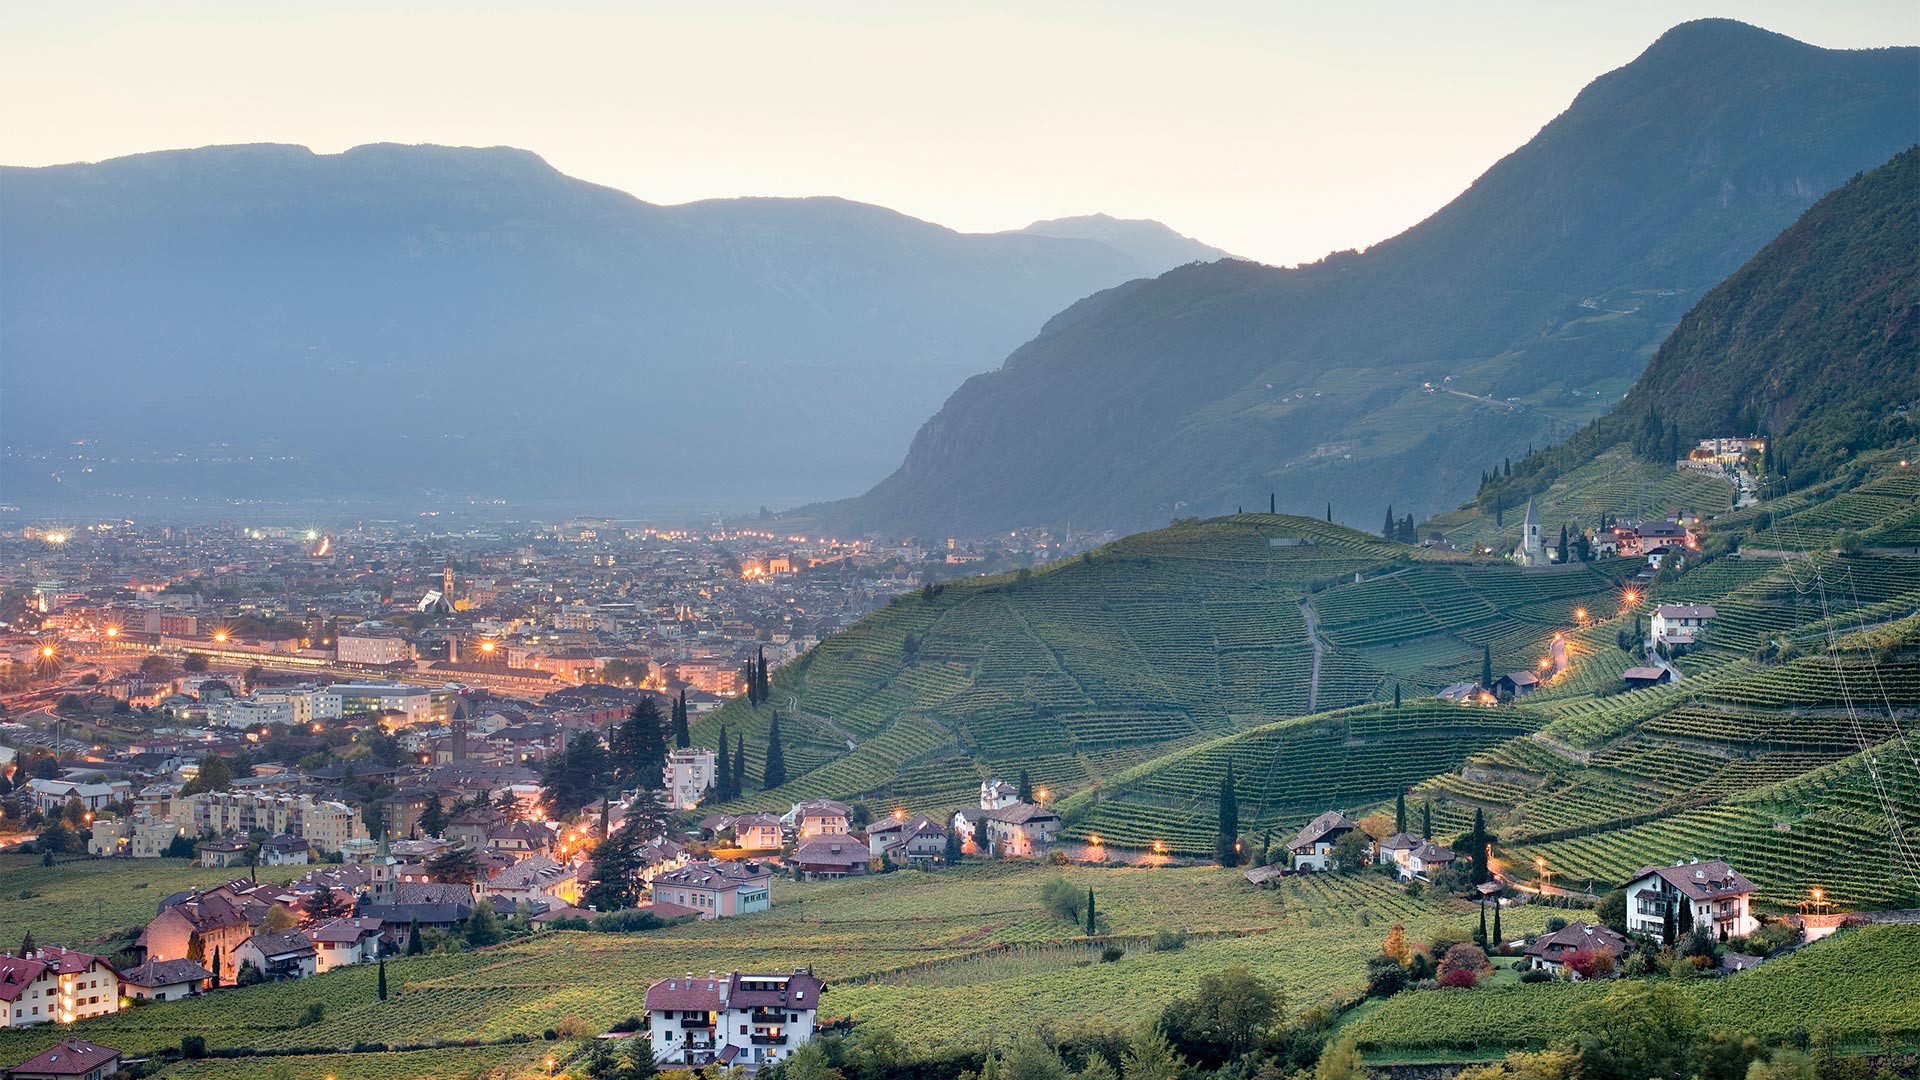 Evening view of the Bolzano vineyards in the foreground and the illuminated city below the mountains in the background.